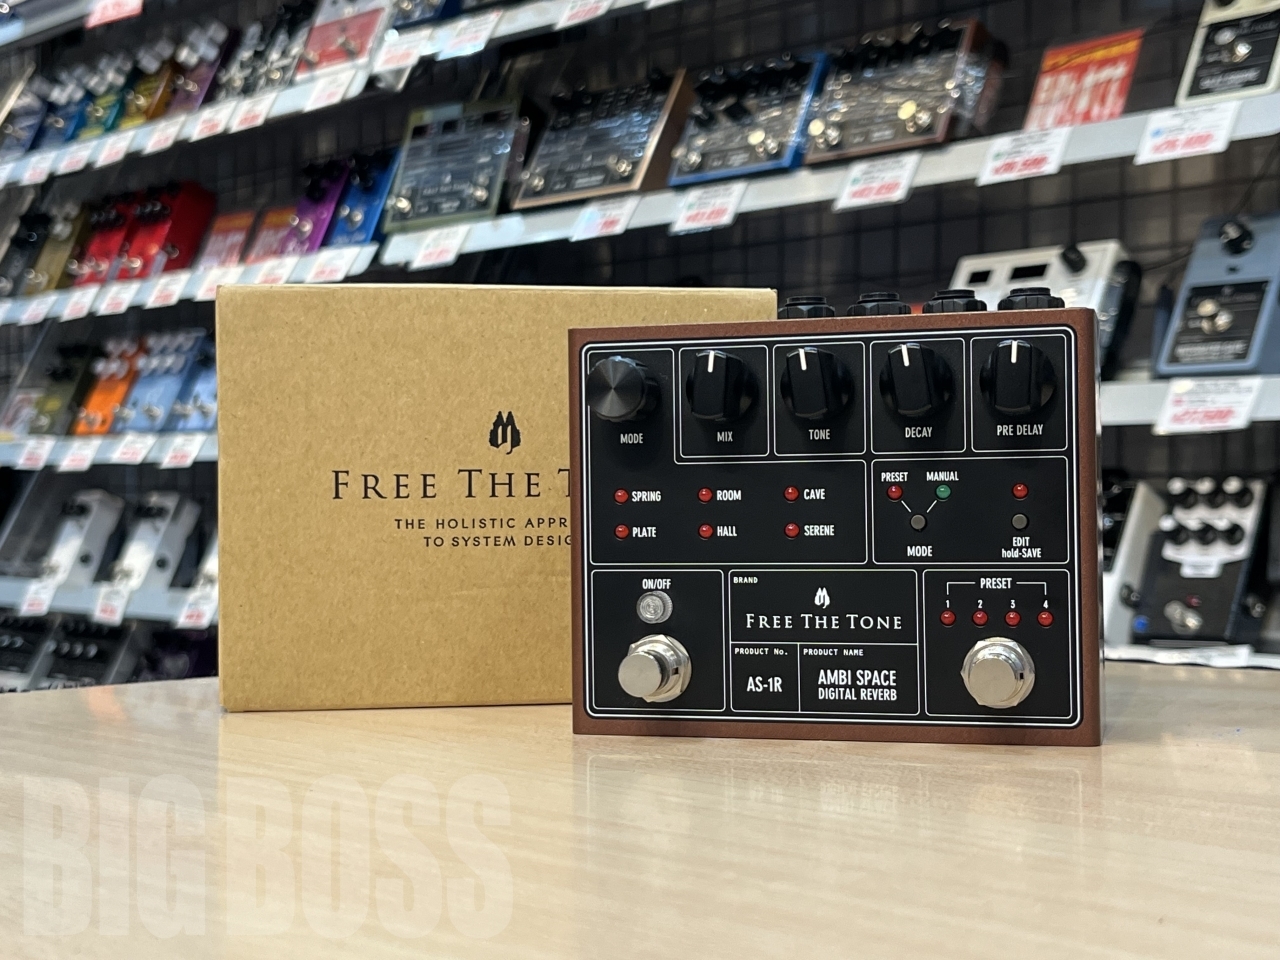 Free The Tone AMBI SPACE AS-1R